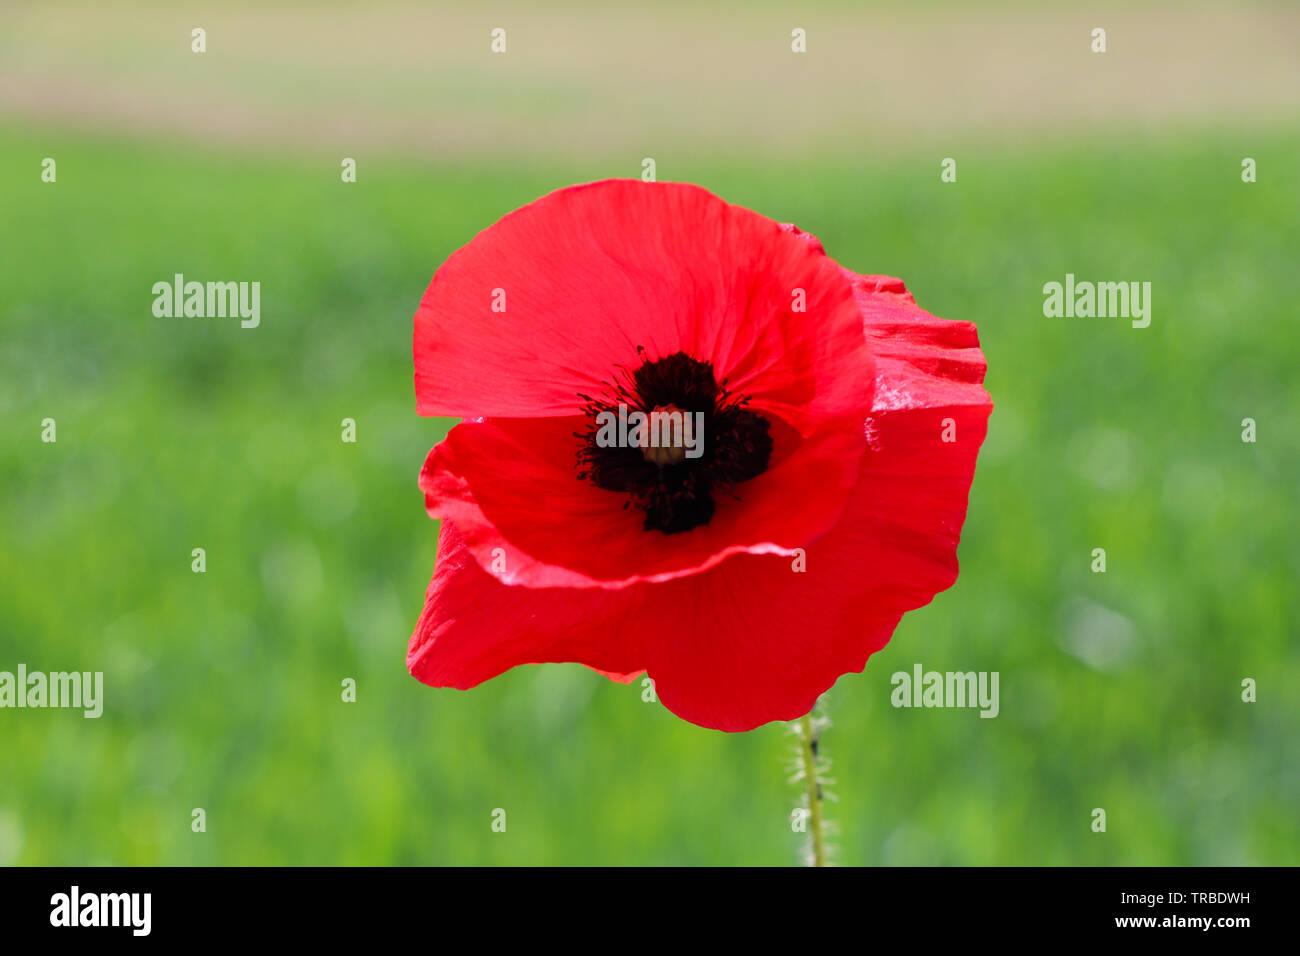 Red poppy flower or Papaver rhoeas in front of green field of rye or Secale cereale Stock Photo